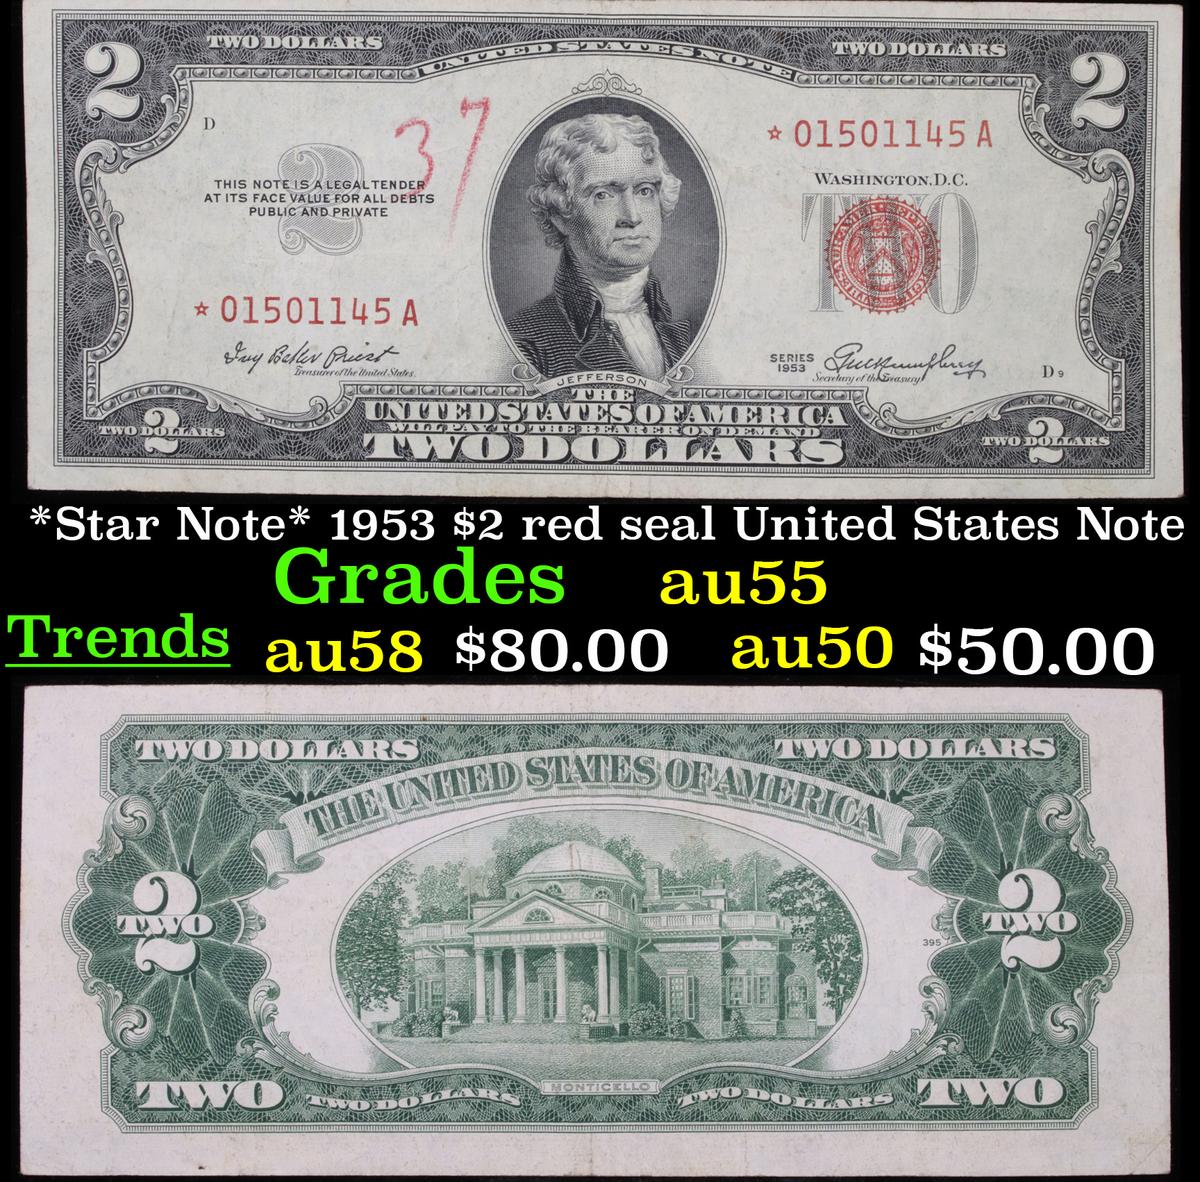 *Star Note* 1953 $2 red seal United States Note Grades